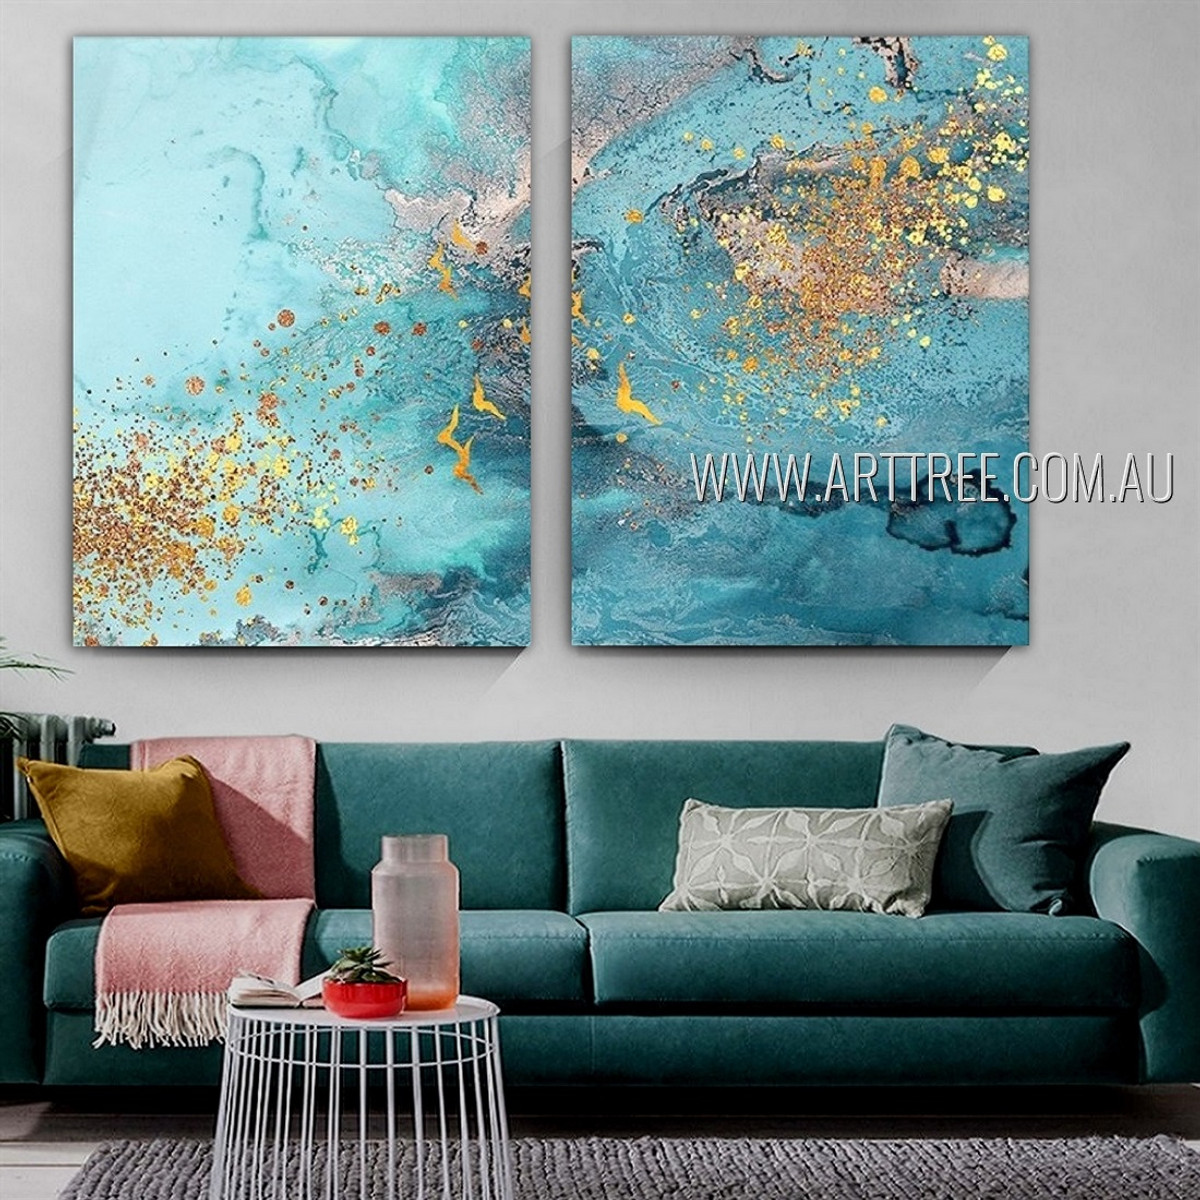 Auburn Spots Abstract Modern Heavy Texture Artist Handmade Framed Stretched 2 Piece Multi Panel Canvas Oil Painting Wall Art Set For Room Decor